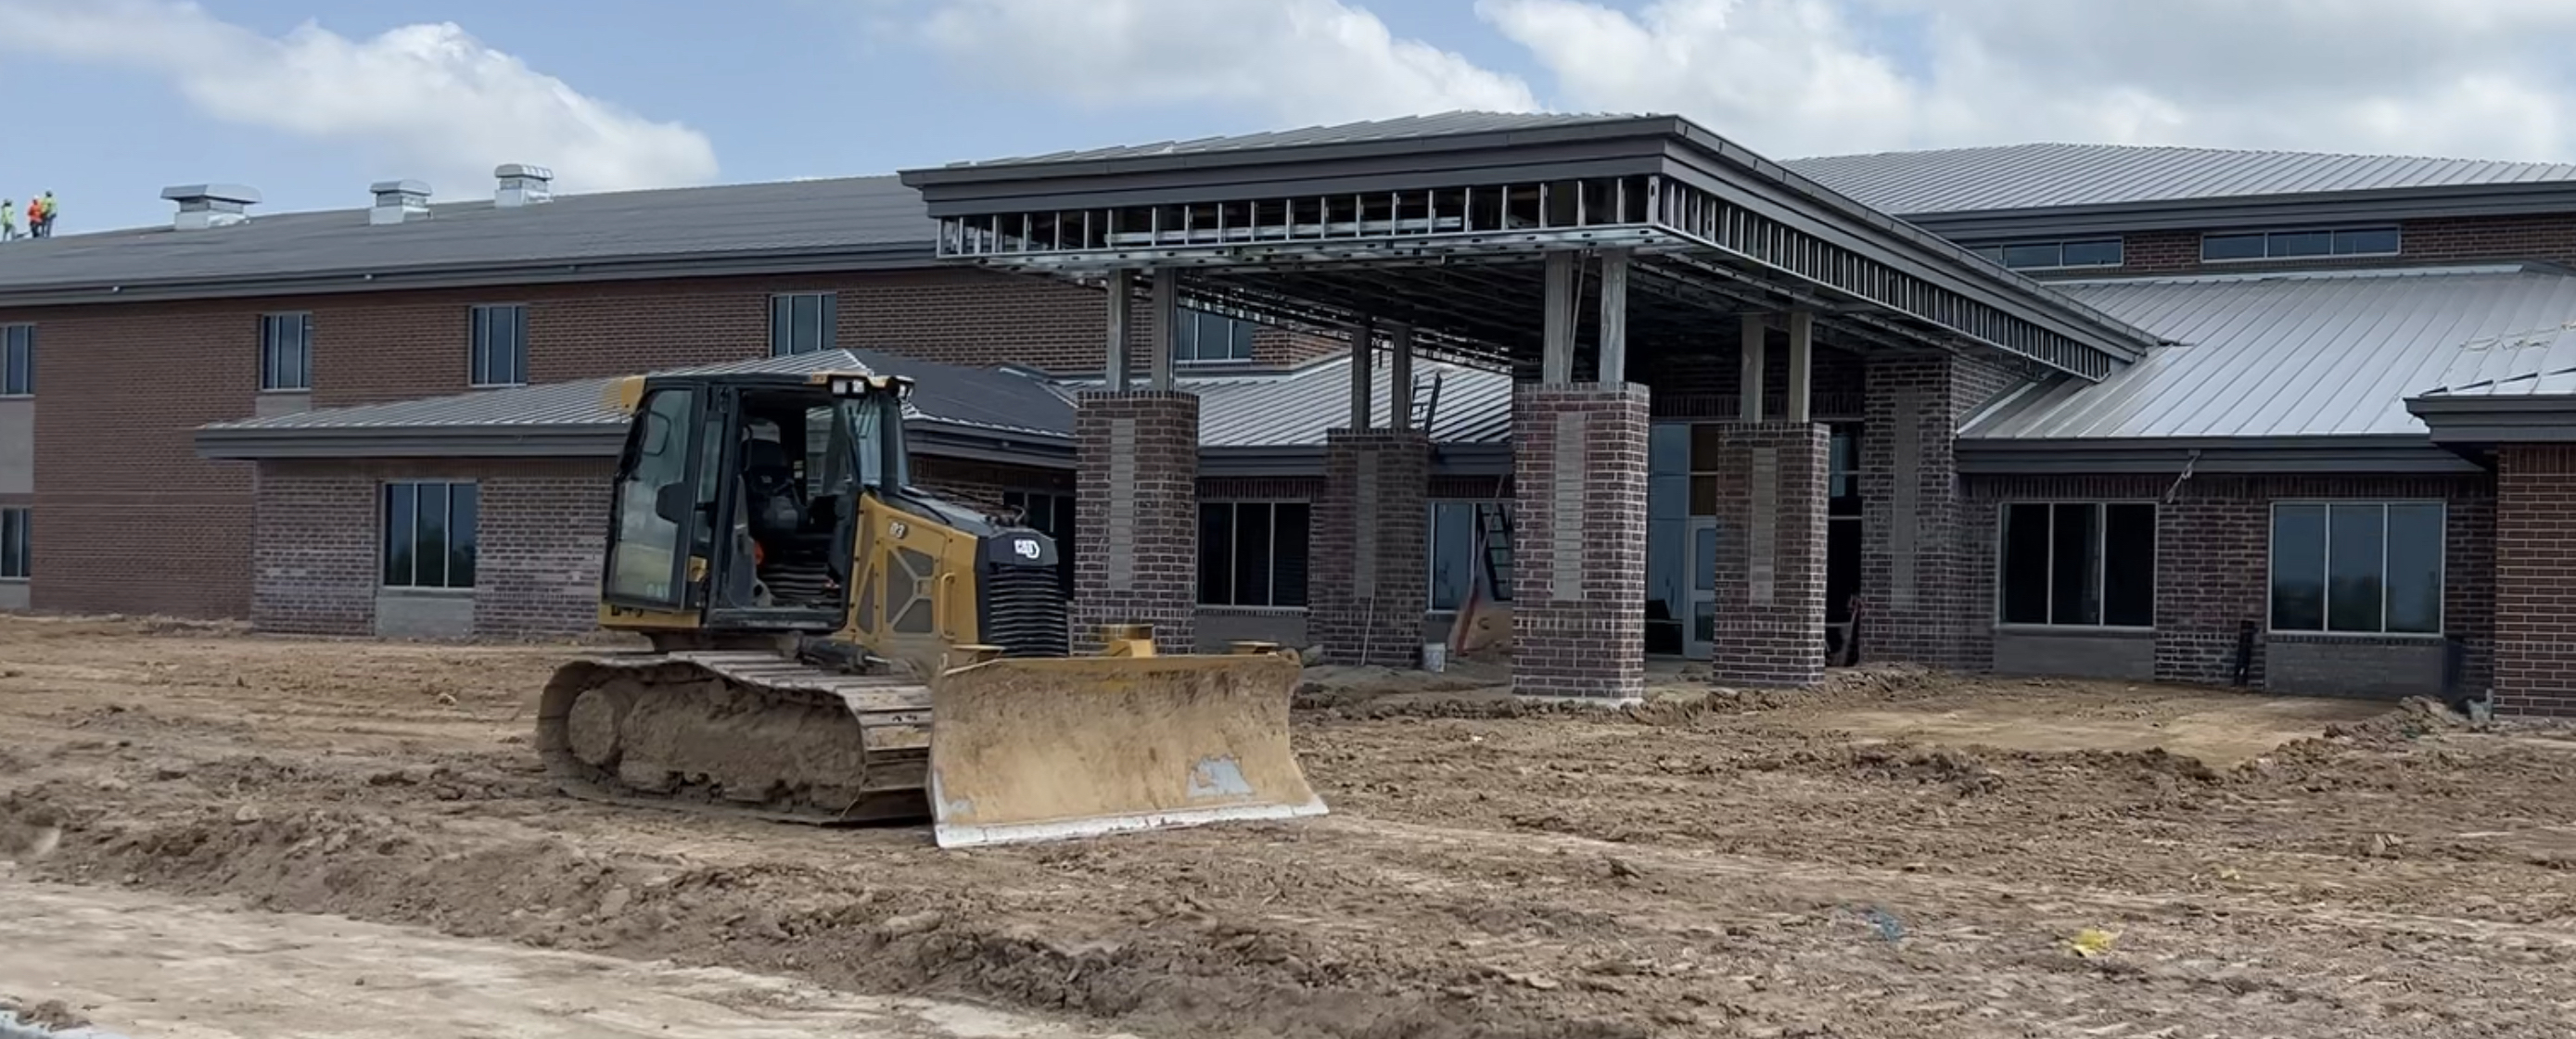 Successive bond elections in the Cleveland Independent School District are paying for an unending expansion of classroom space like this Middle School in the Spring of 2022